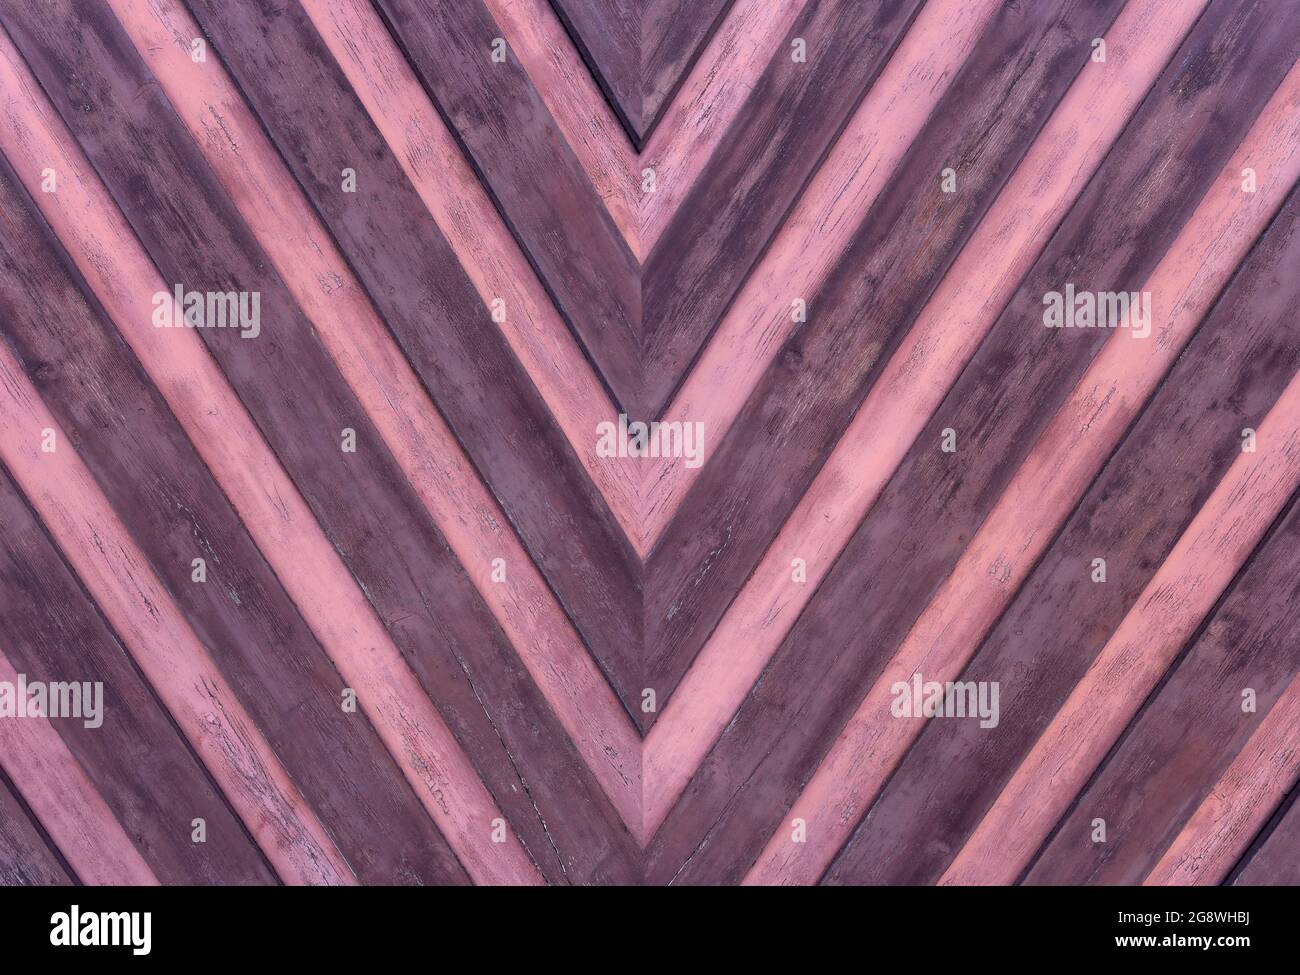 Detail of a wooden wall with pointed striped pattern in pink and purple Stock Photo